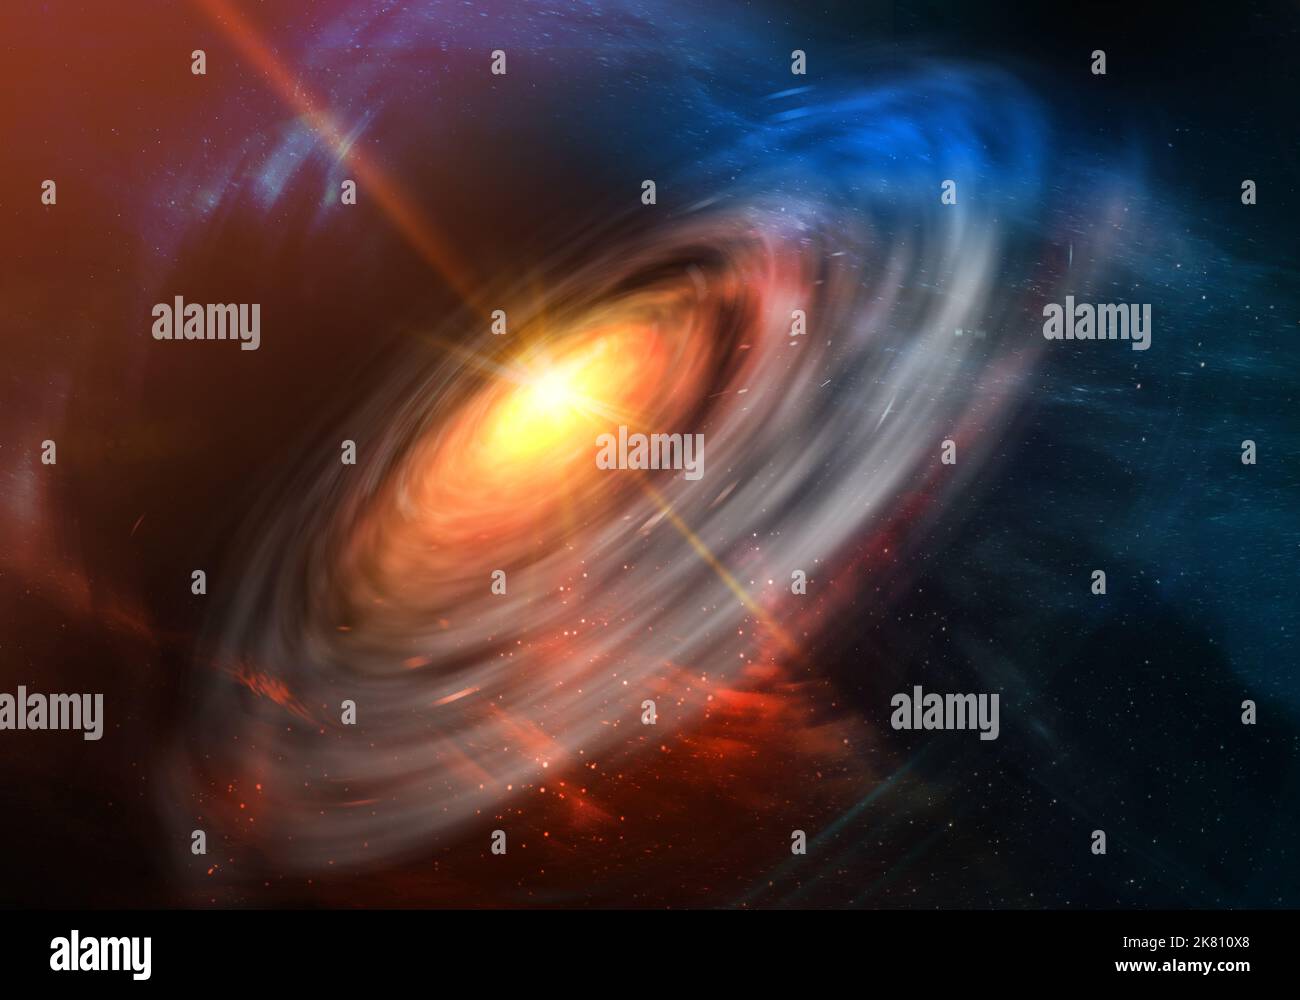 Evolution of spiral galaxies, stars and galaxies in outer space background showing the beauty of space exploration Stock Photo